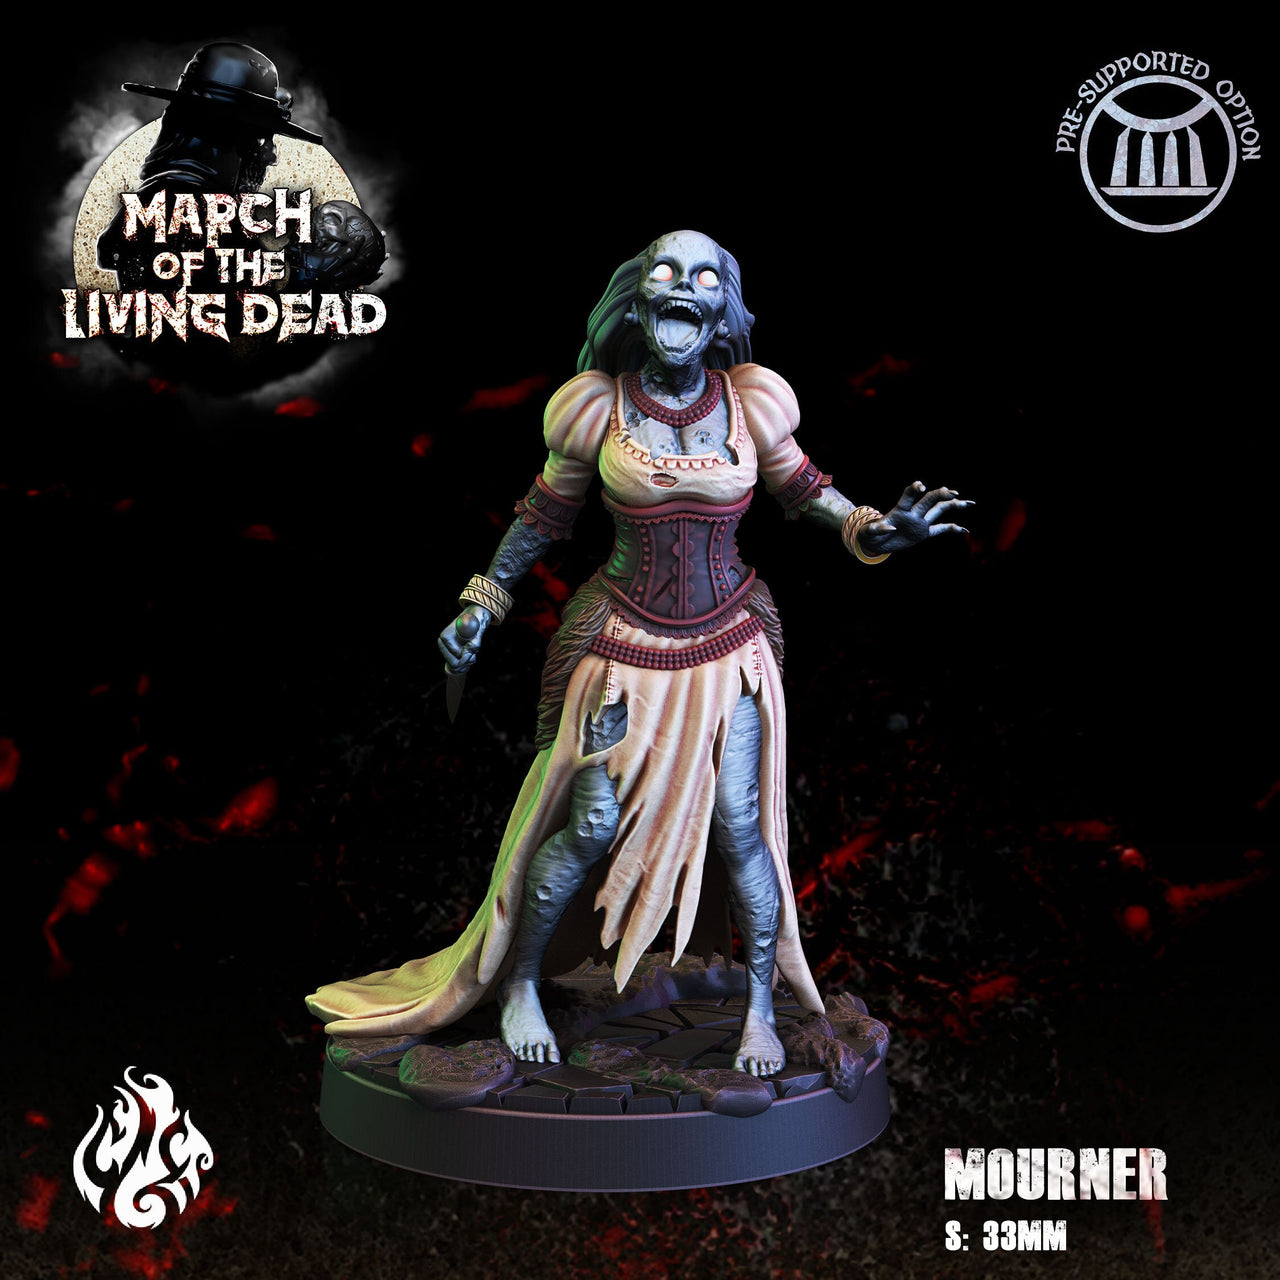 The Mourner - Crippled God Foundry - March of the Living Dead 